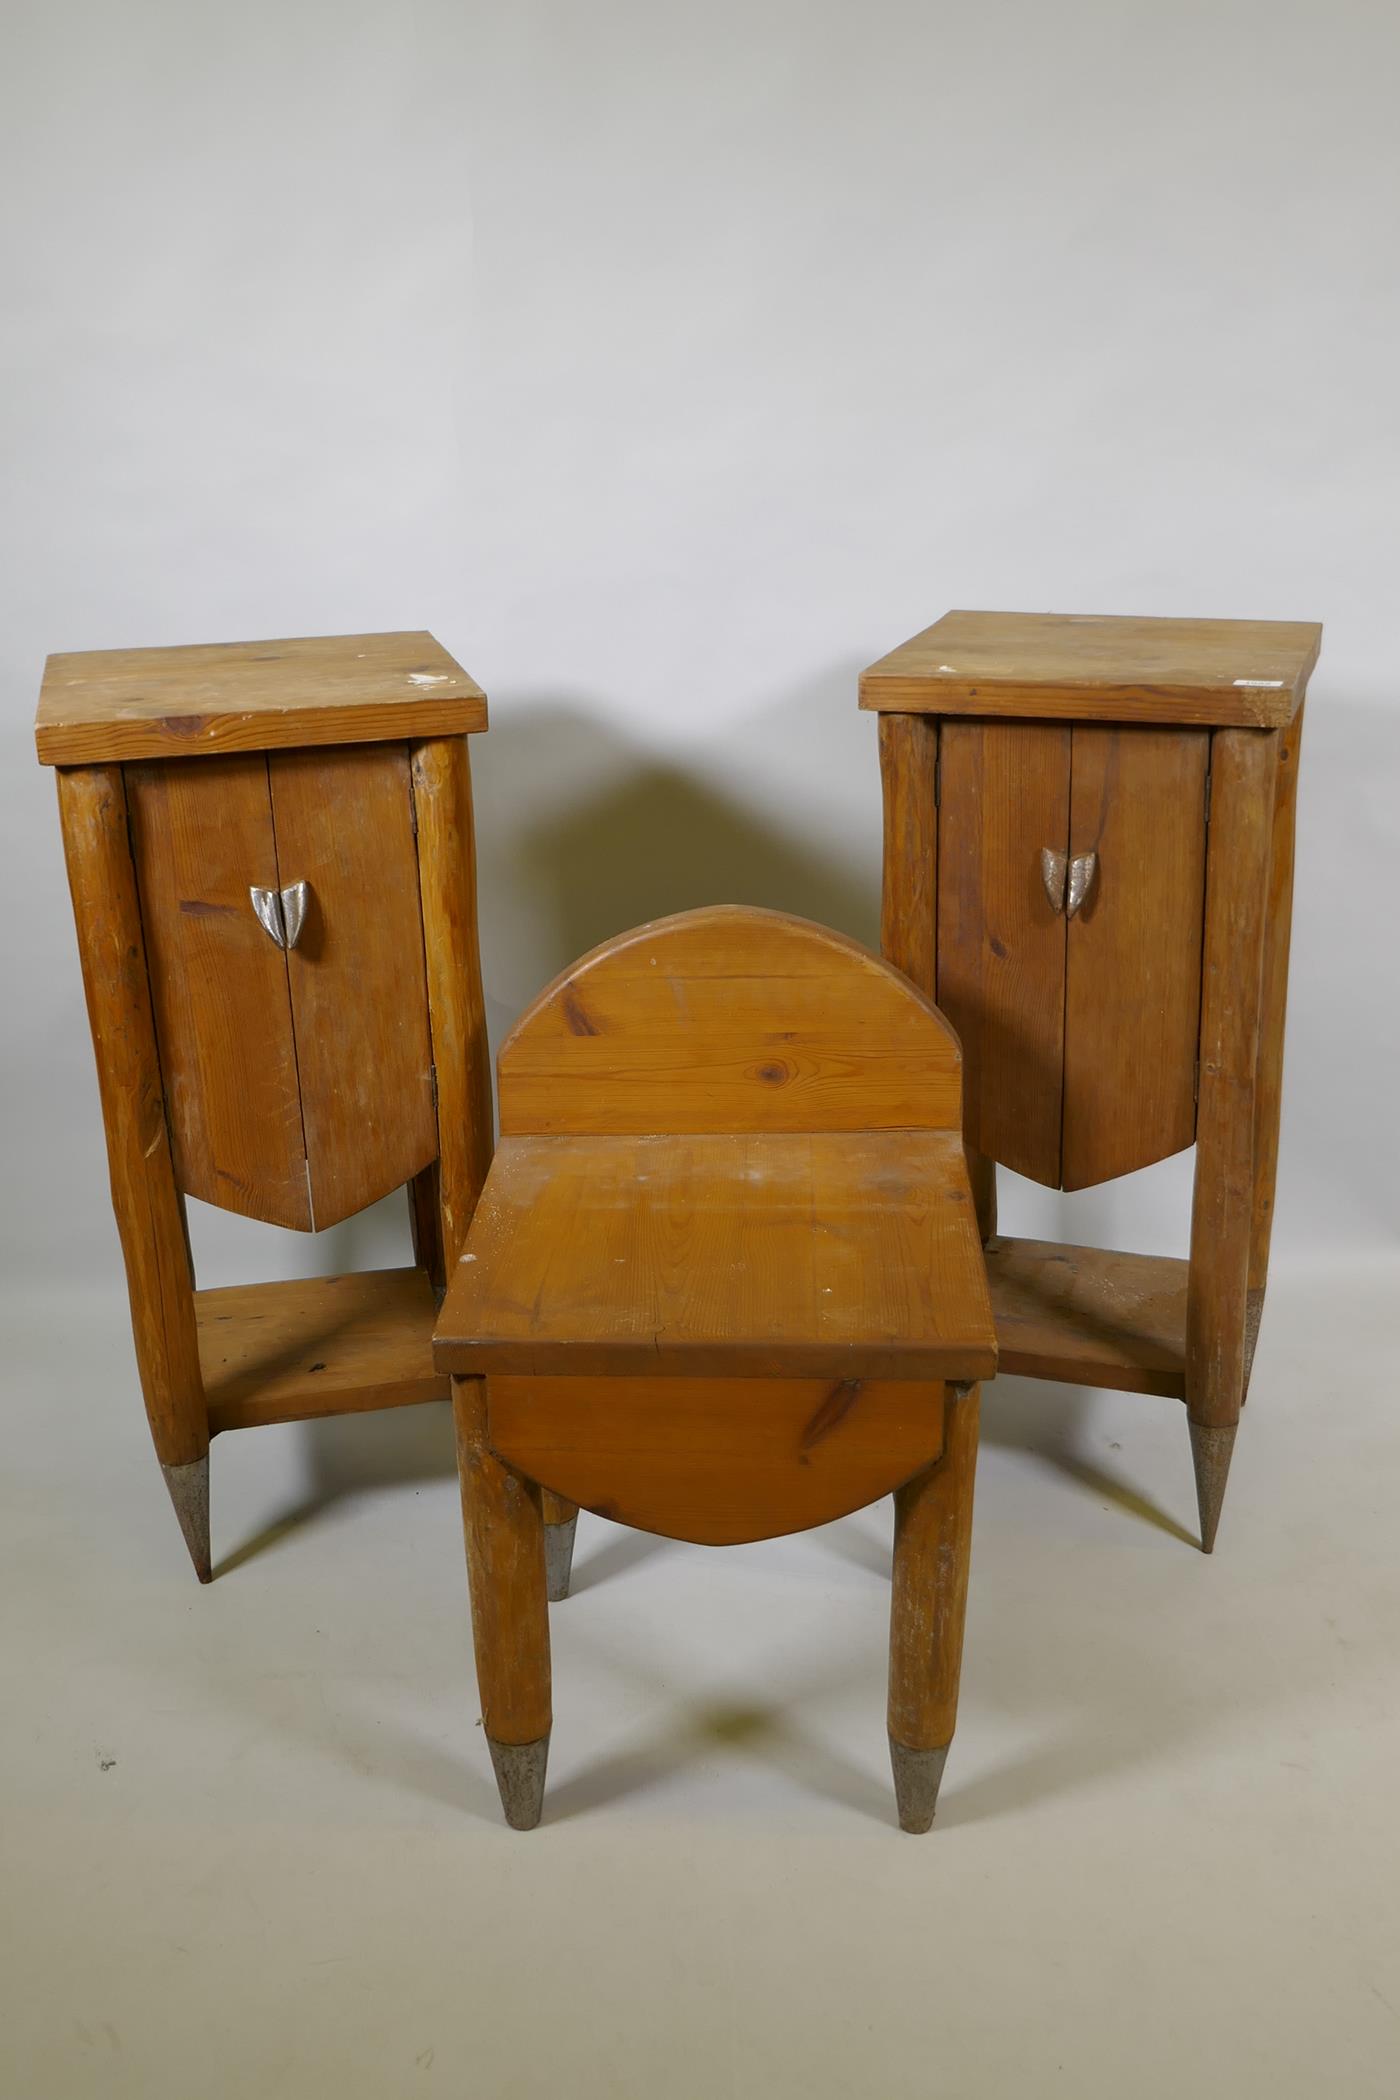 A pair of pine bedside cupboards and a pine stool, ensuite to the previous lot, with the same Paul